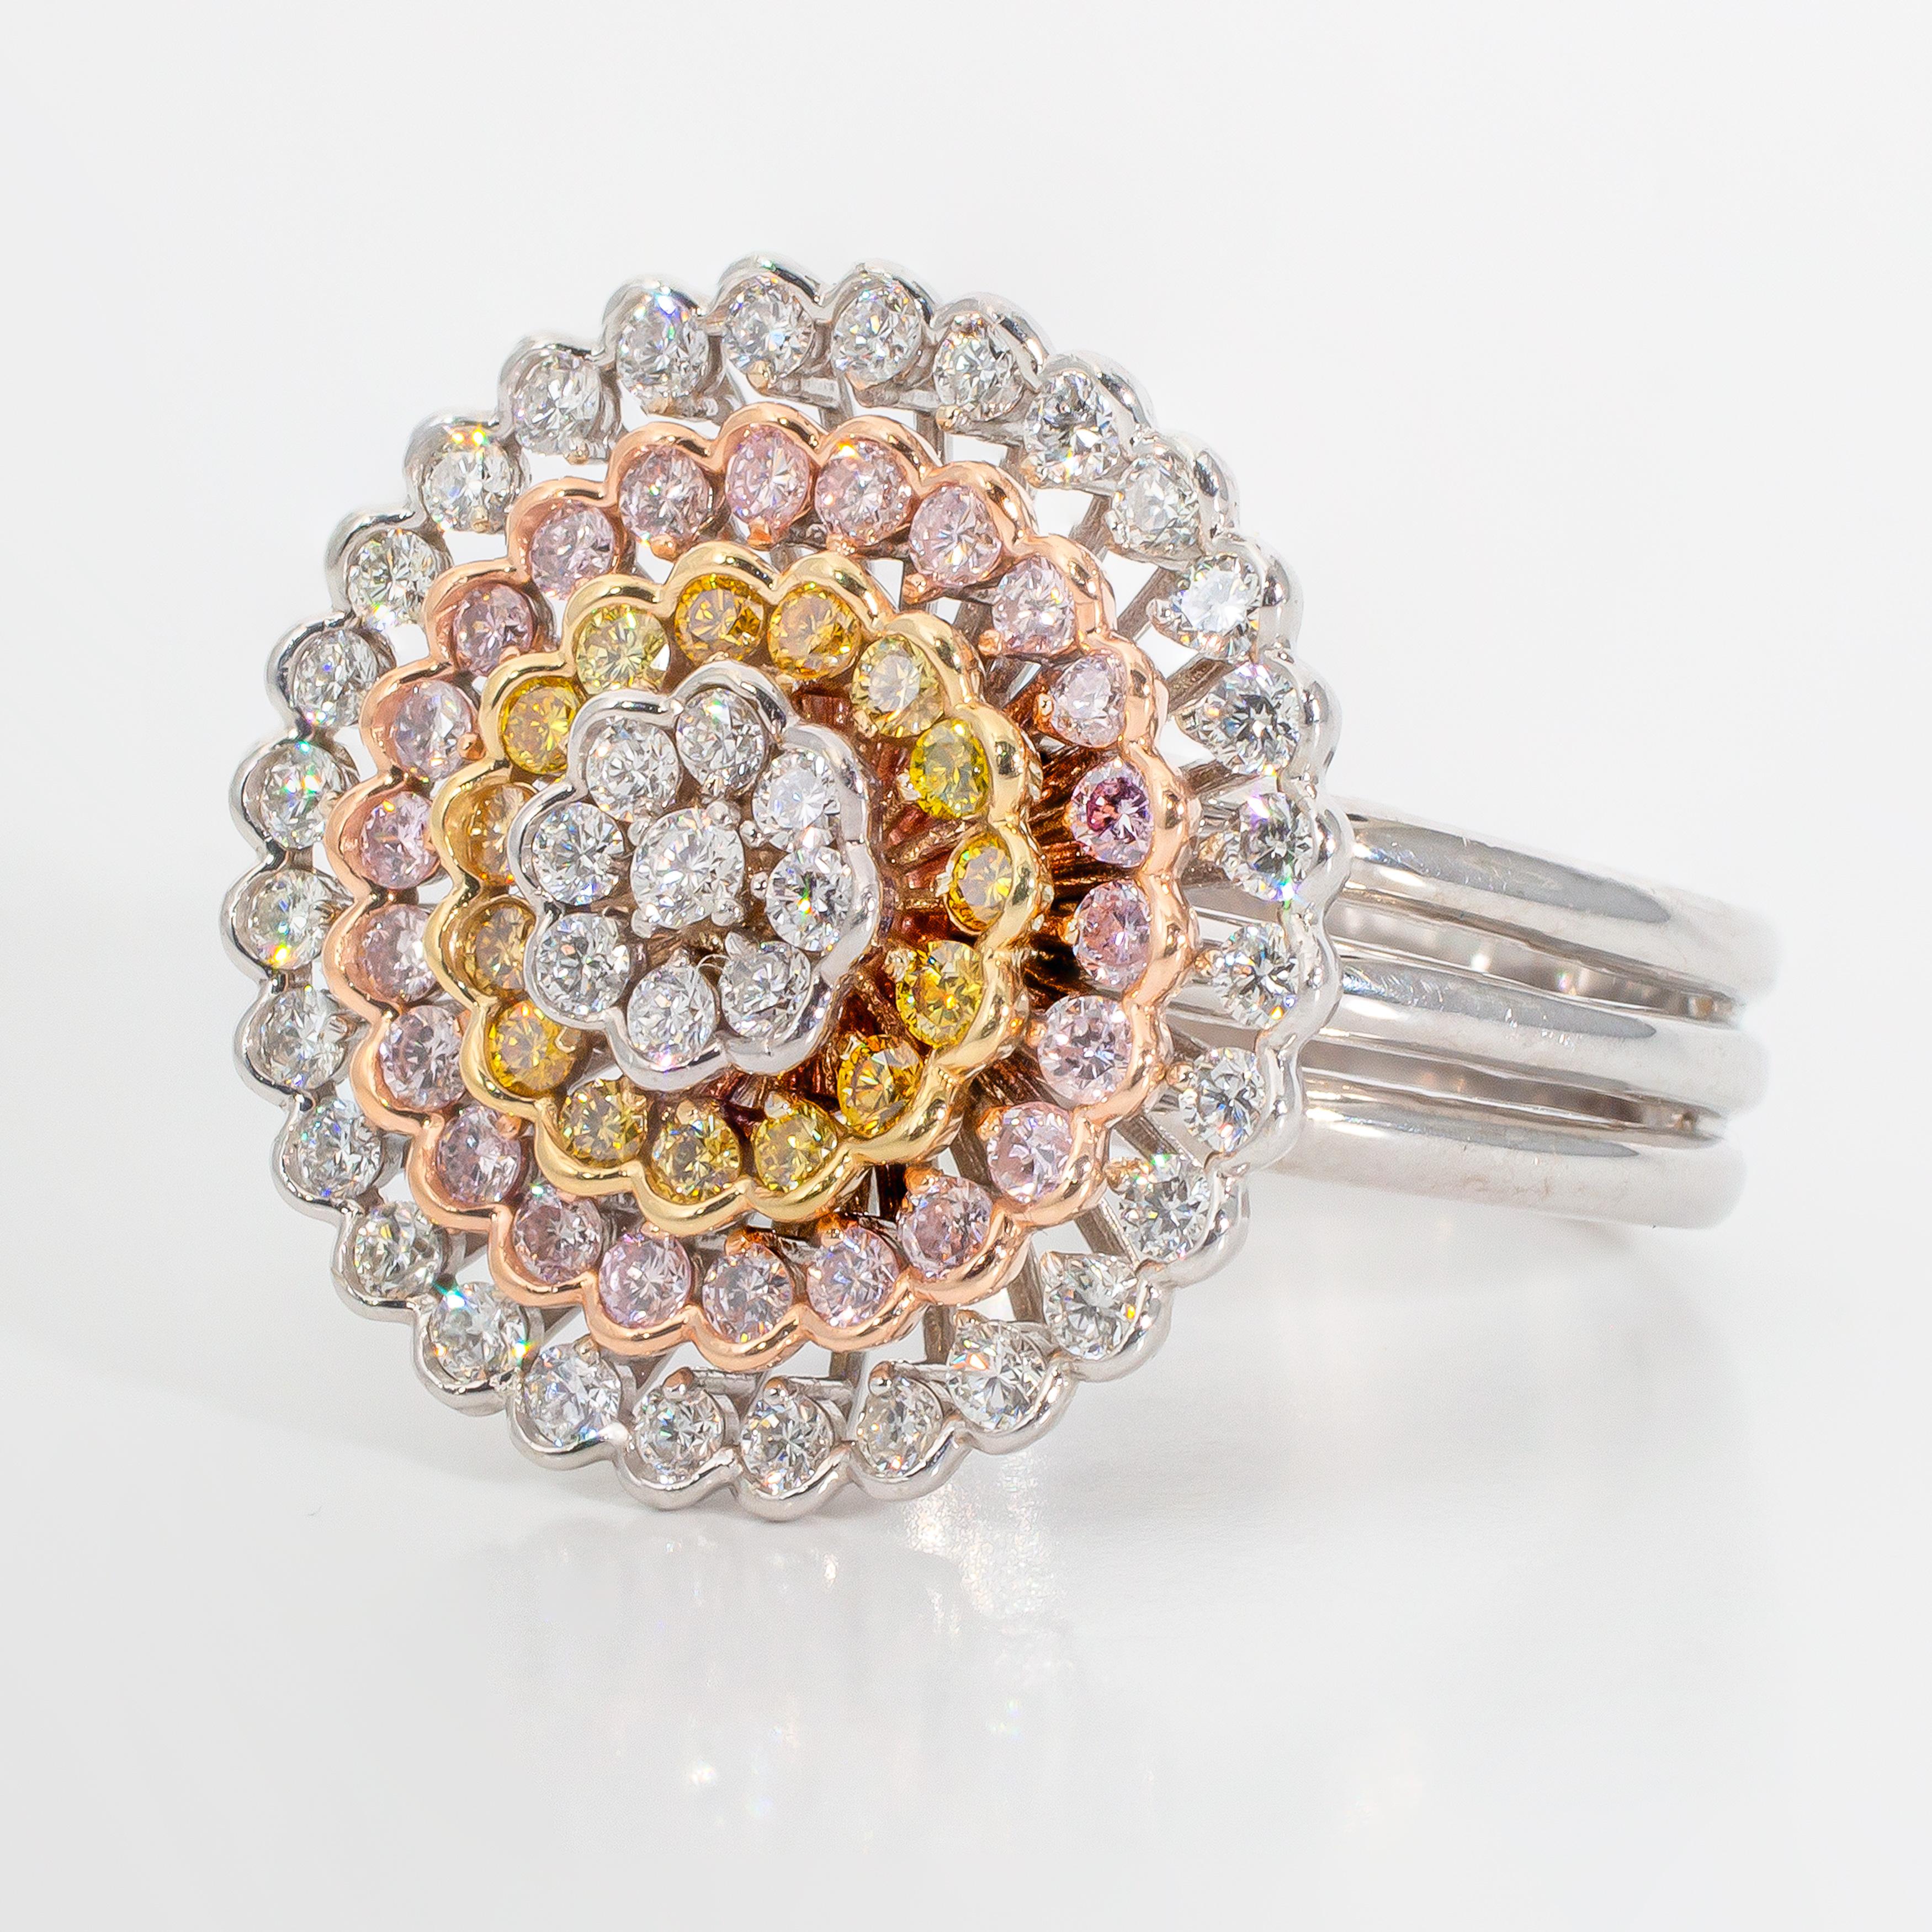 1.42 Carat Total Weight Natural Pink, Yellow, and White Diamond Ring For Sale 1